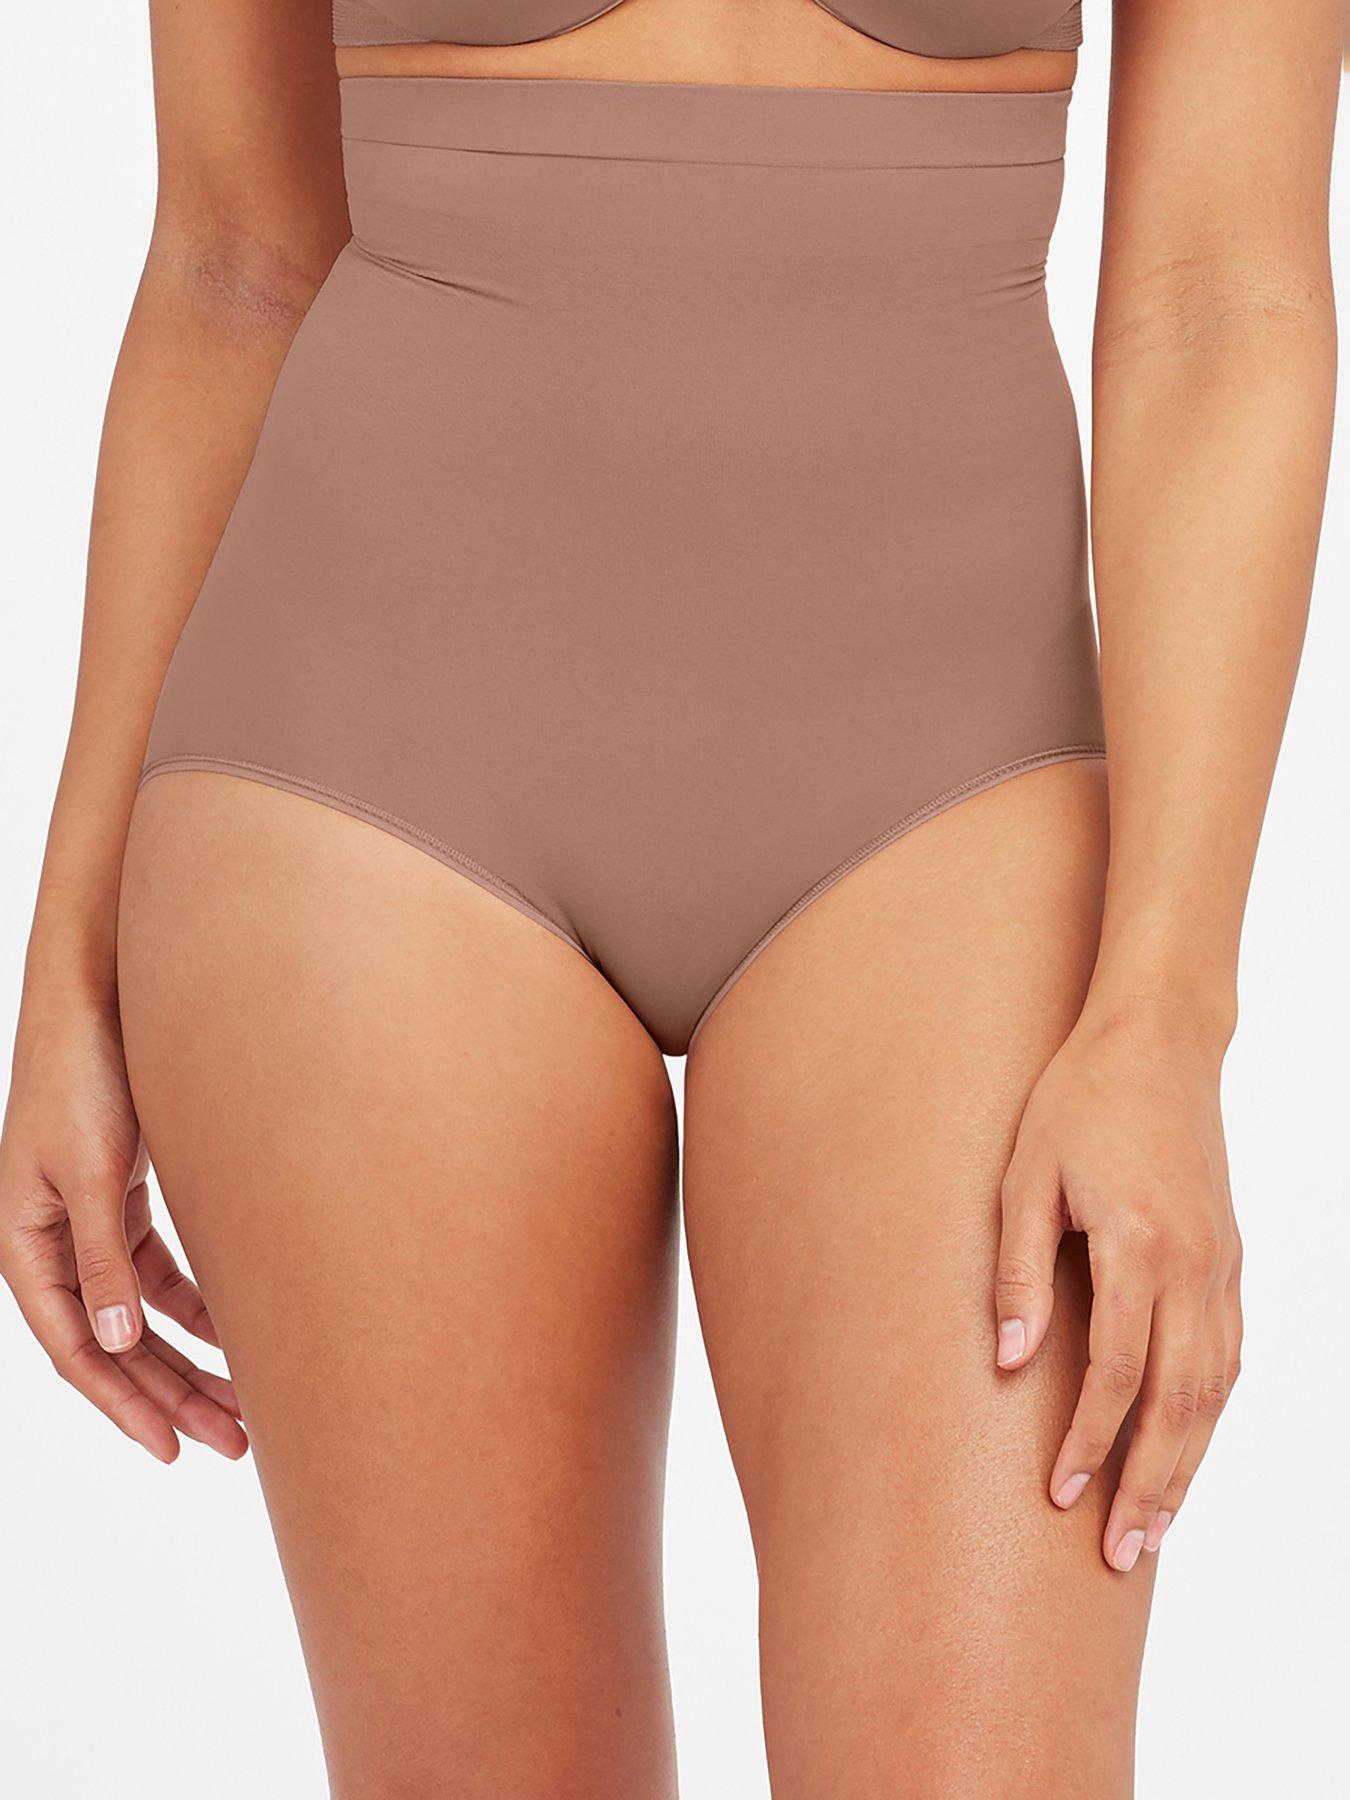 Undie-tectable Thong, Soft Nude – PINK ARROWS